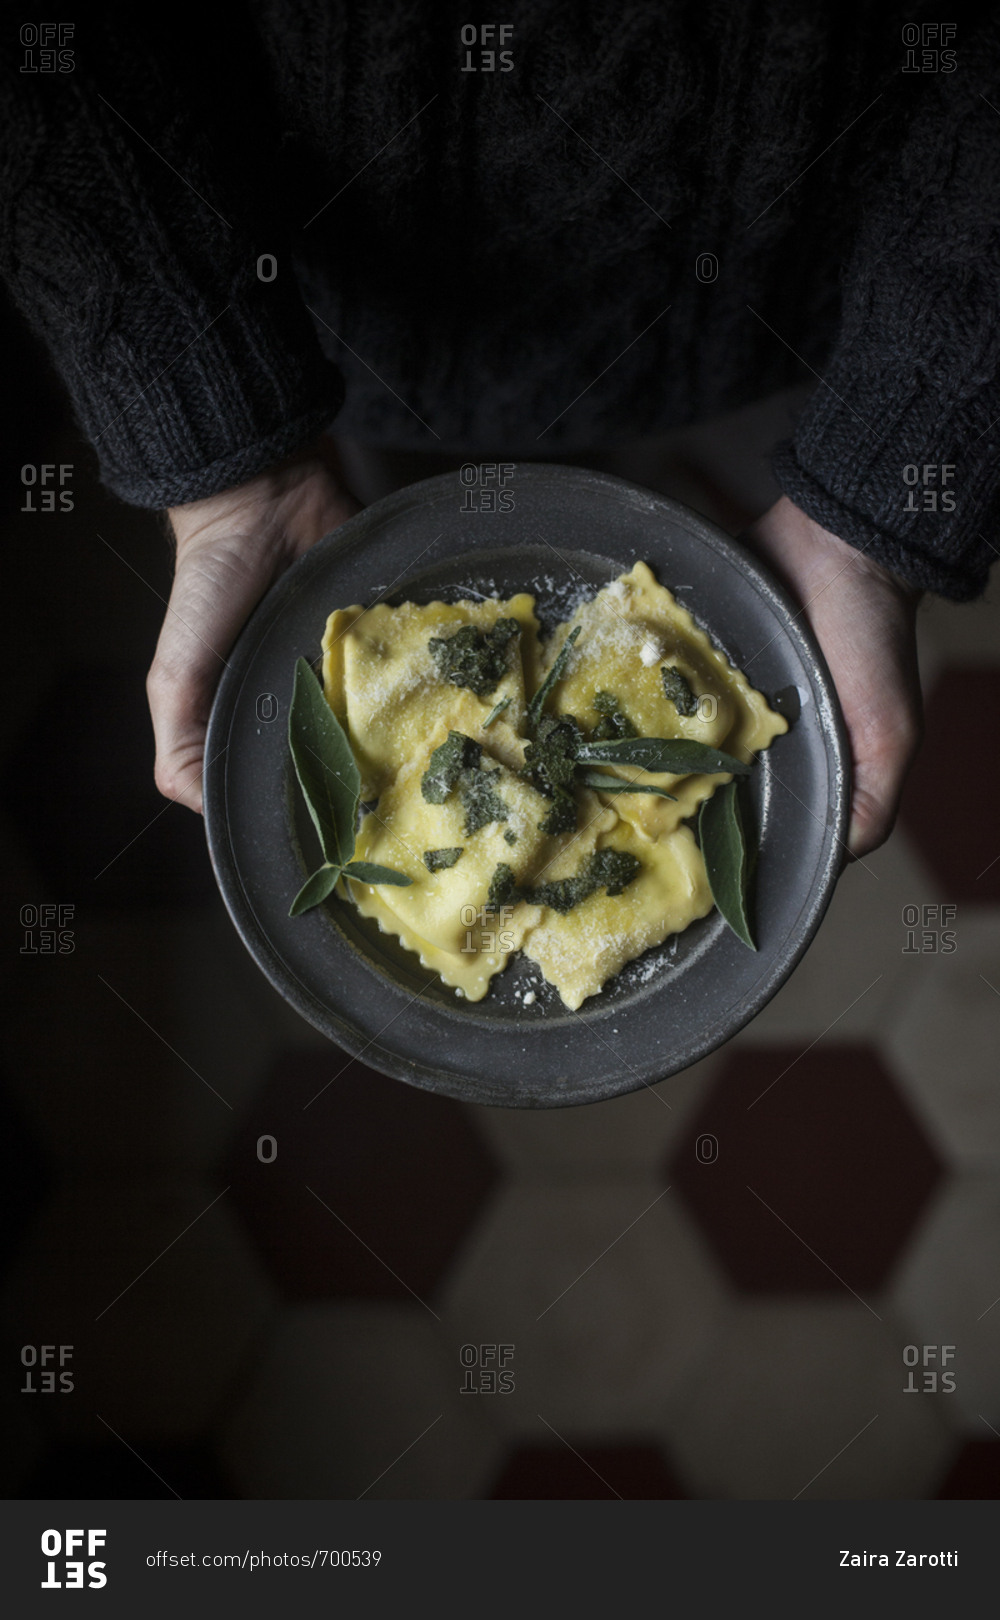 Overhead view of a person holding a dish of homemade ravioli seasoned with butter, sage and Parmesan cheese